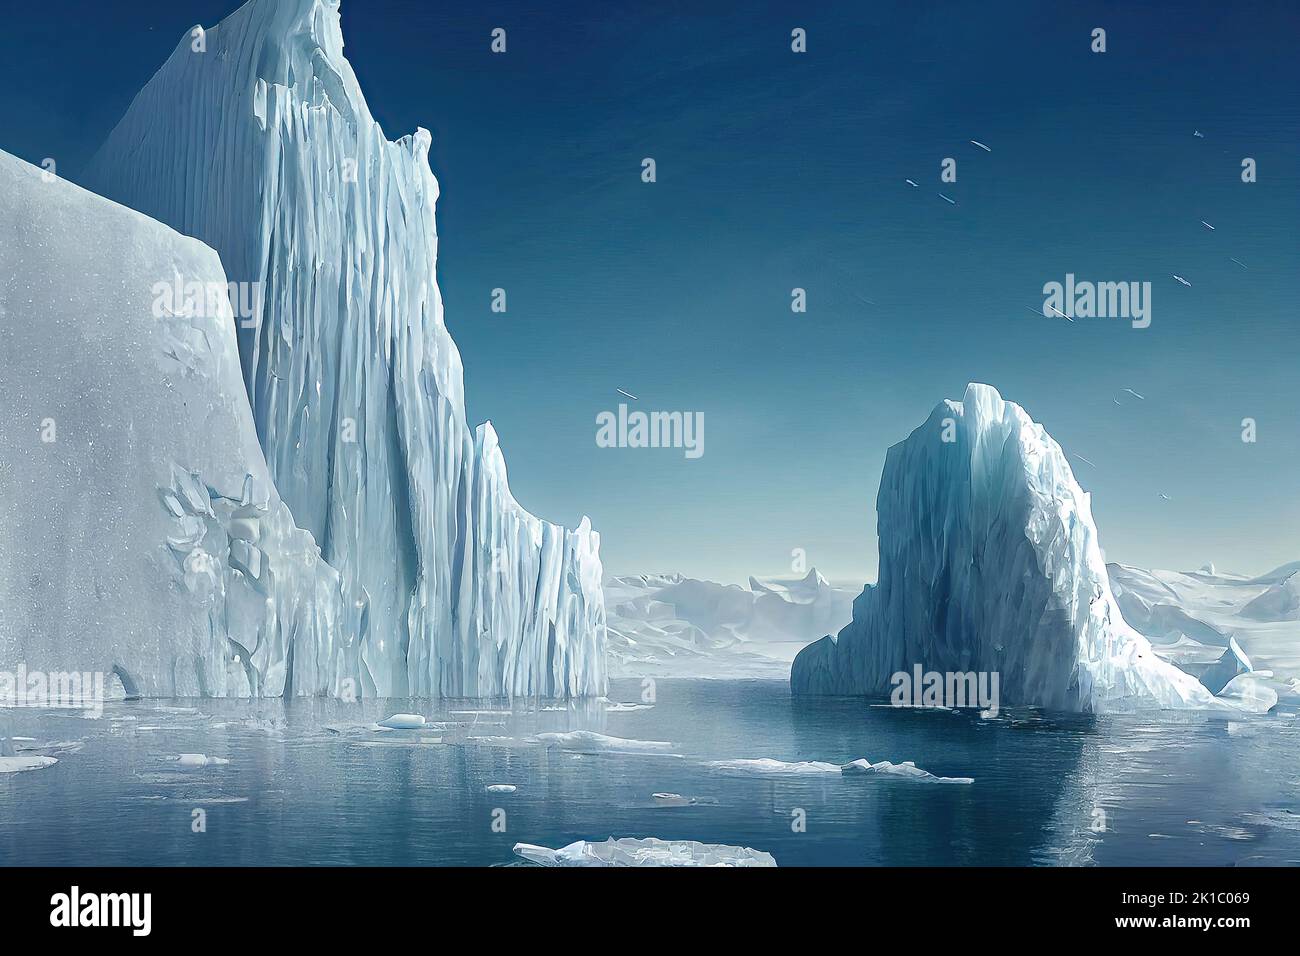 Iceberg melting in the arctic ocean at dawn. Concept of global warming and climate change. 3D illustration and digital painting. Stock Photo